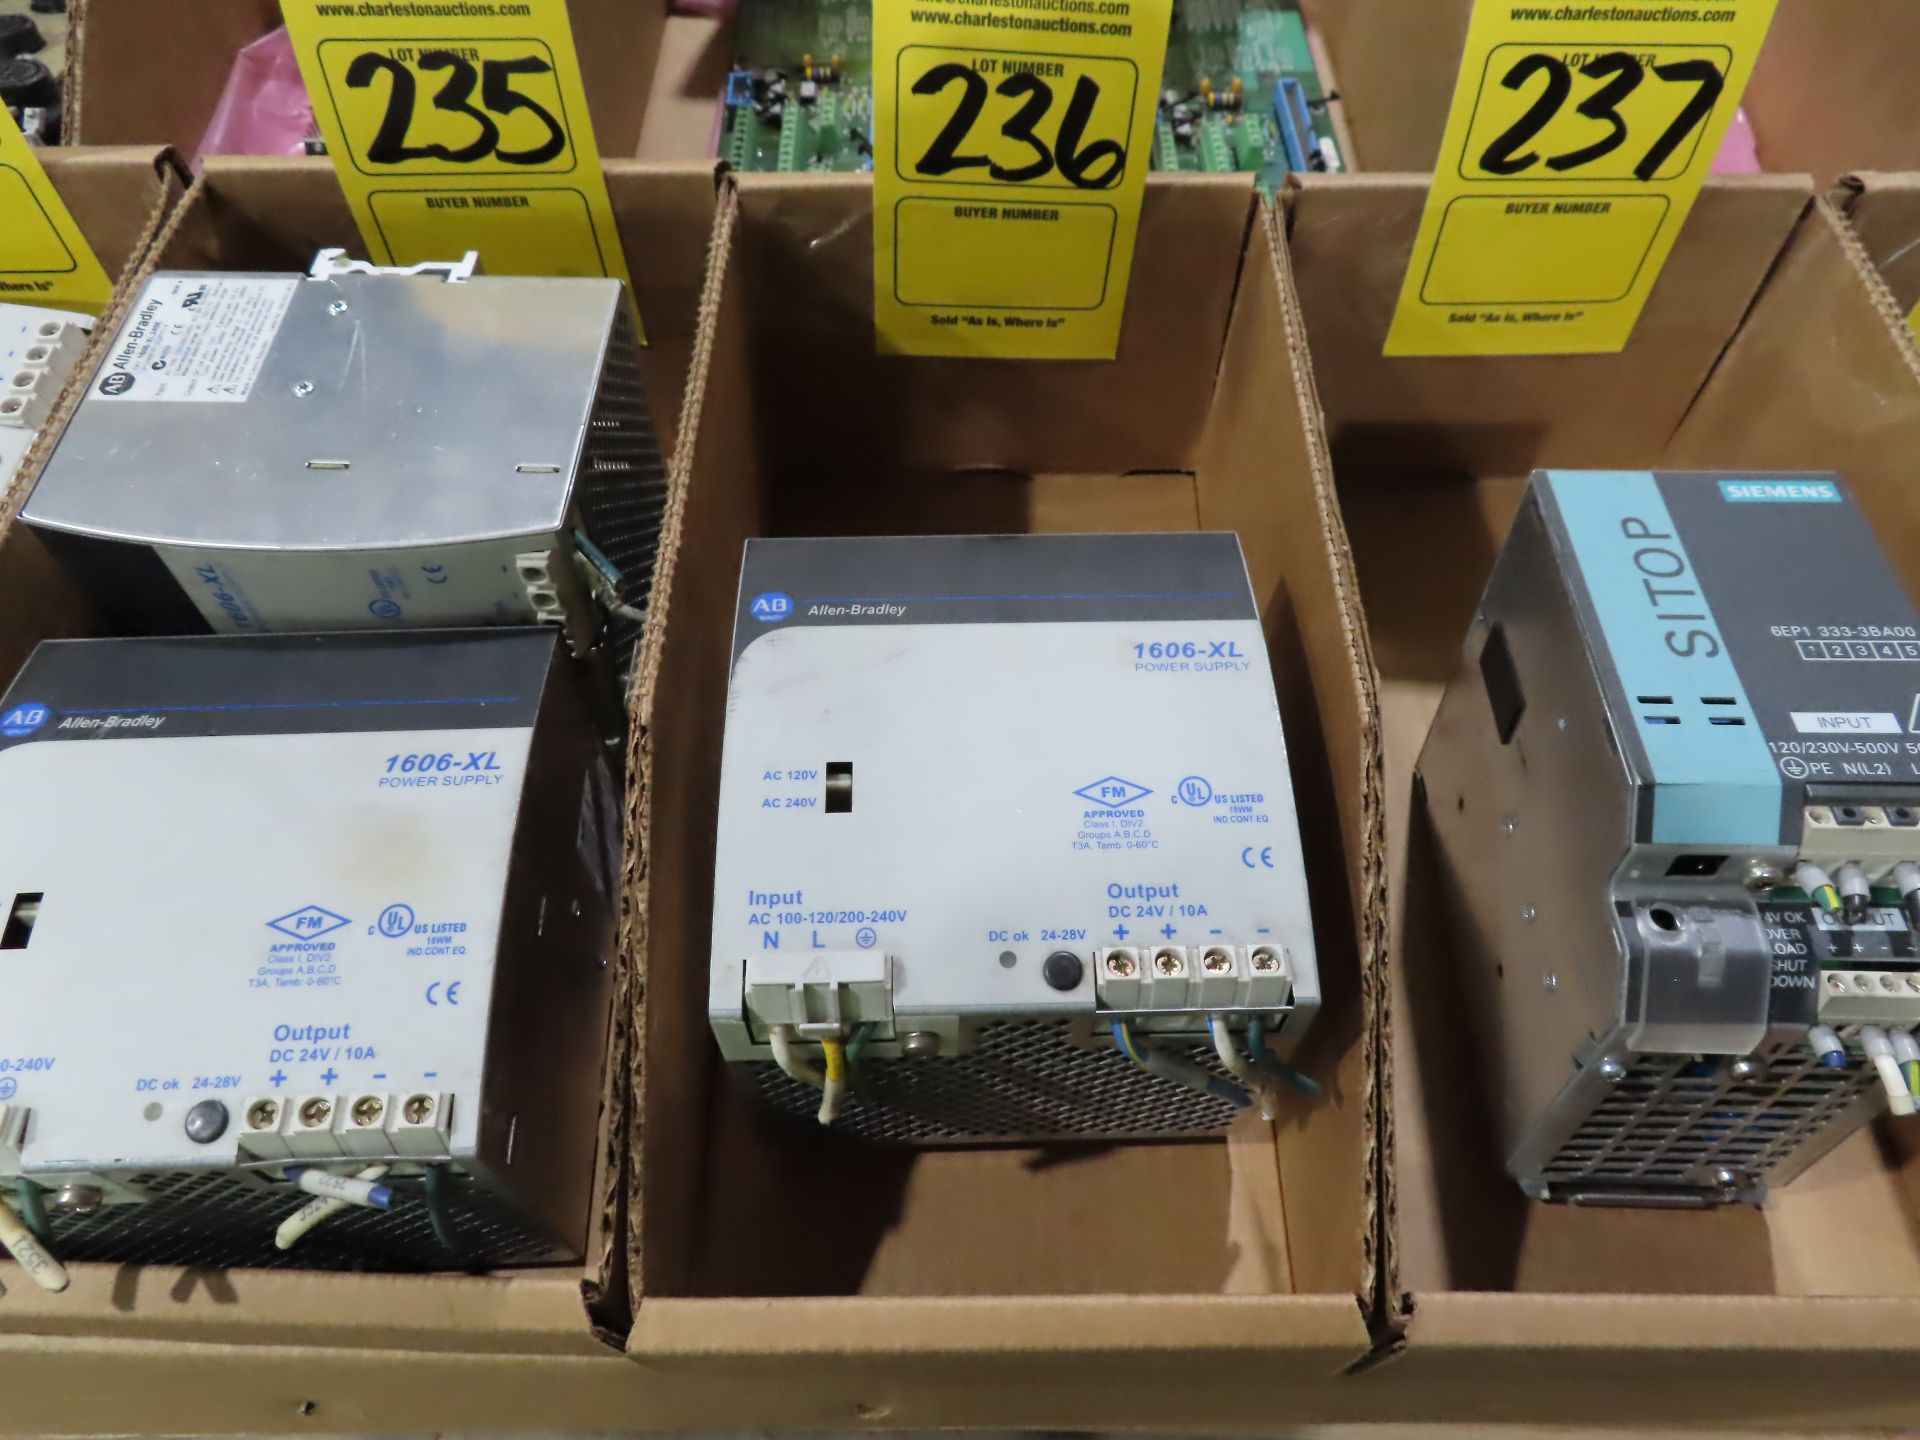 Allen Bradley catalog 1606-XL240E power supply, as always, with Brolyn LLC auctions, all lots can be